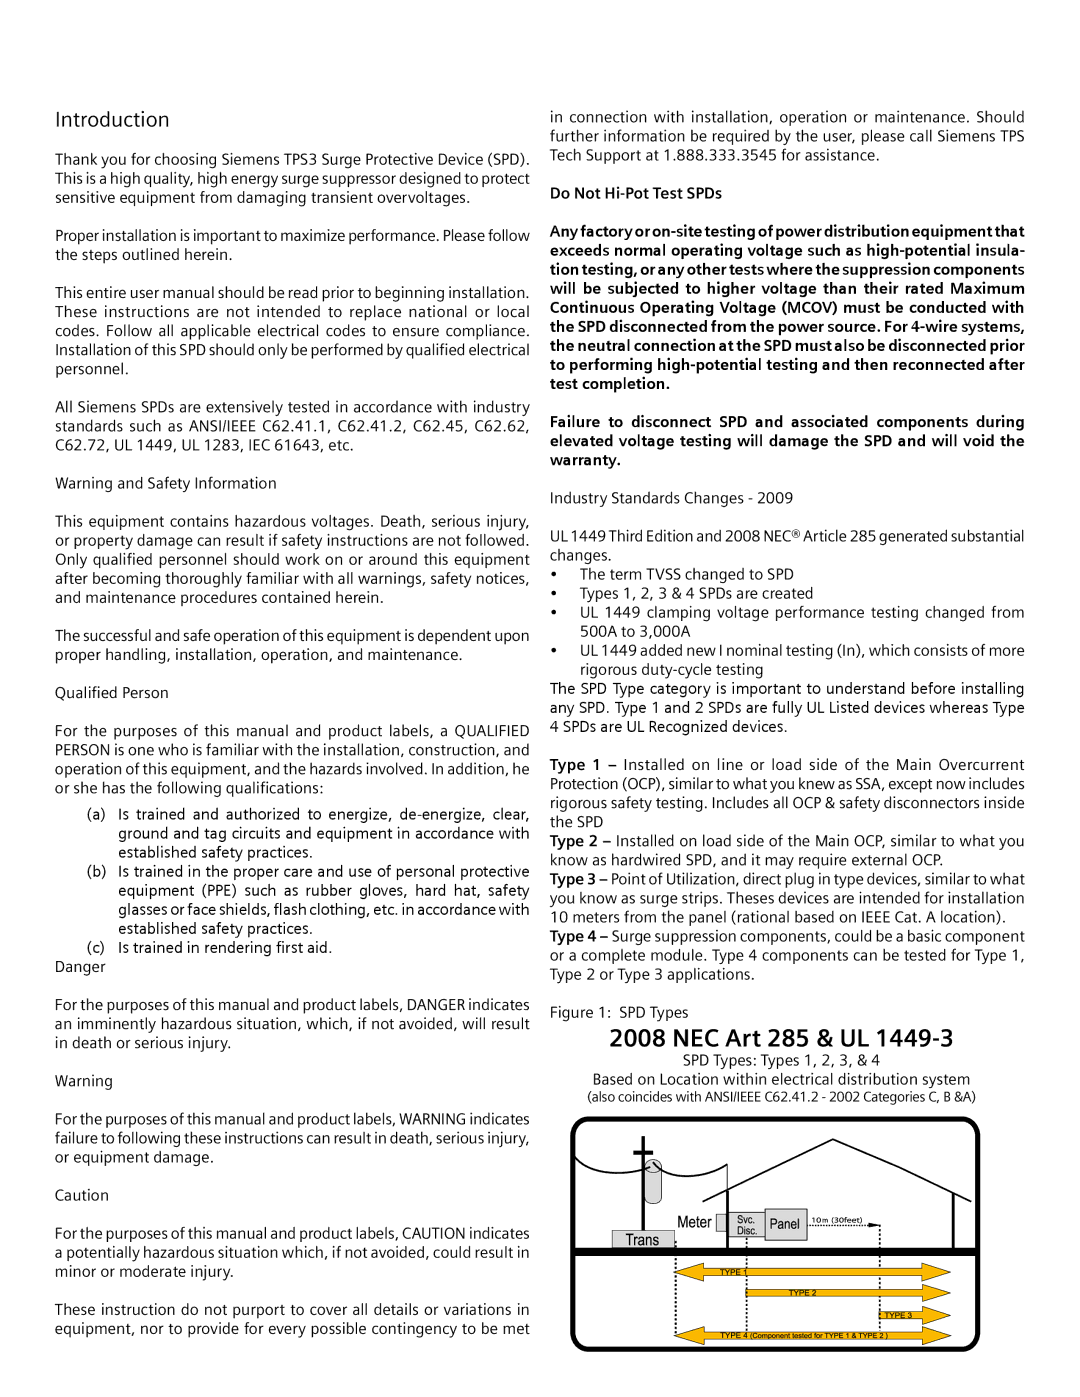 Siemens TPS3 11 user manual Introduction, SPD Types 